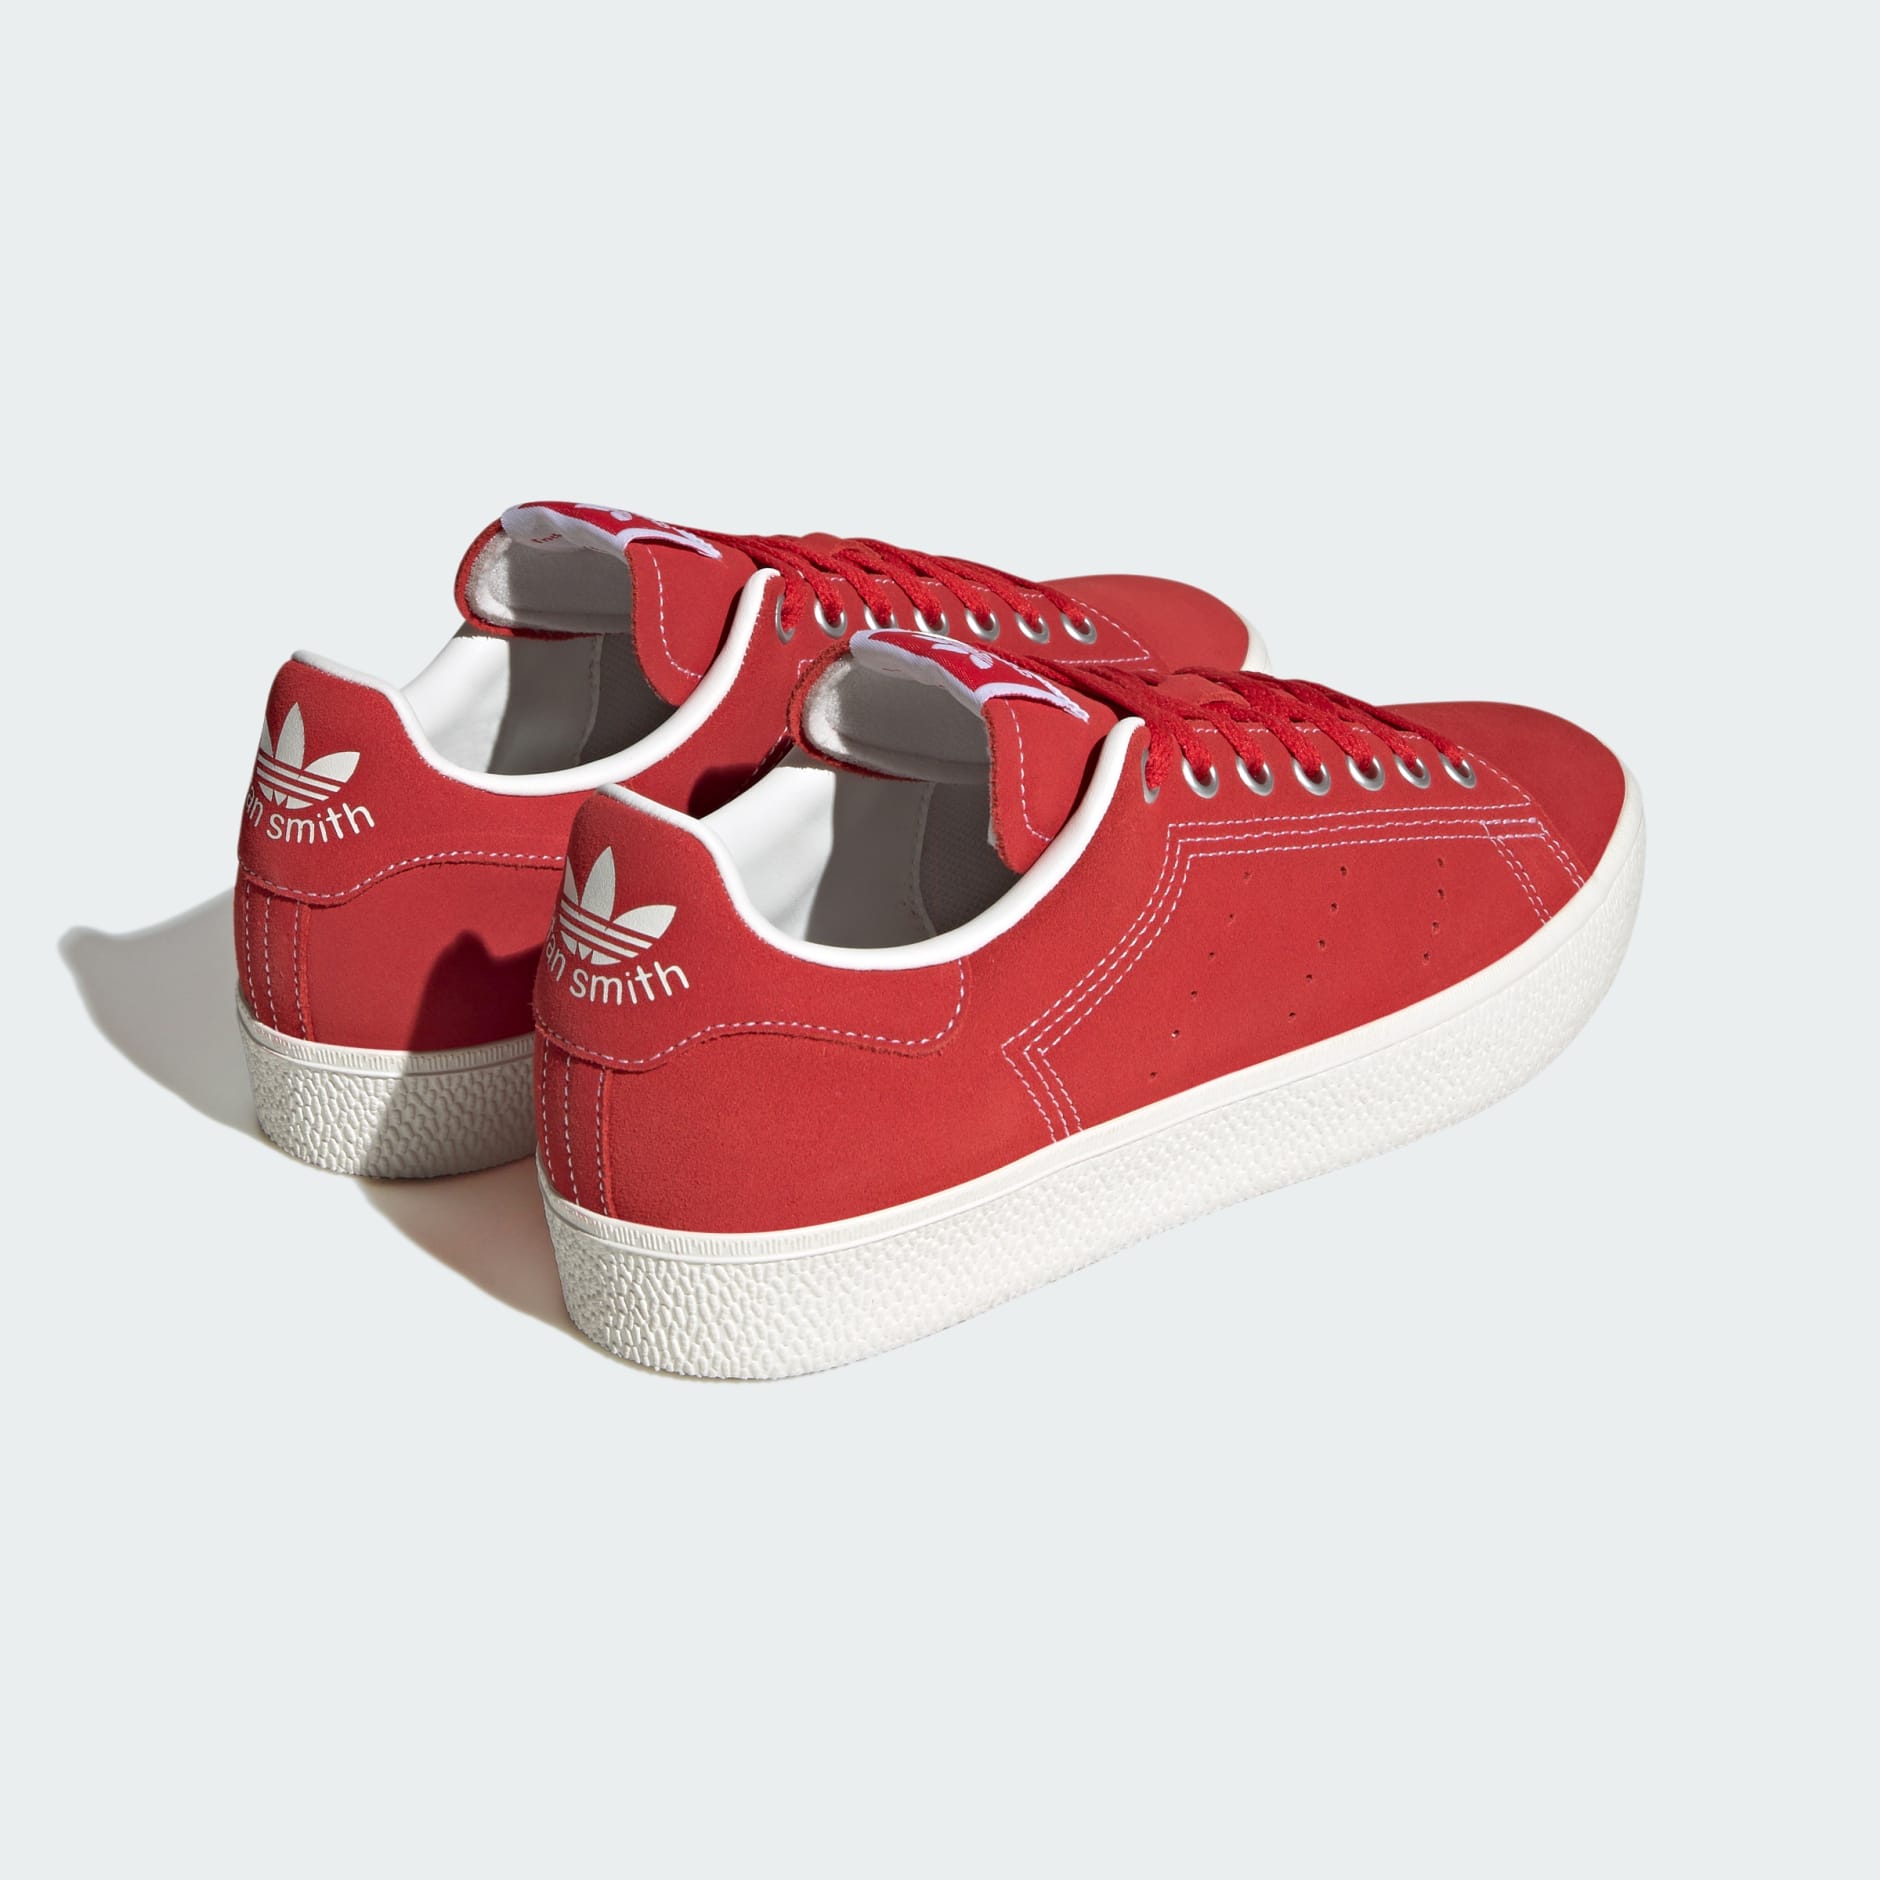 Shoes - Stan Smith CS Shoes - Red | adidas Kuwait